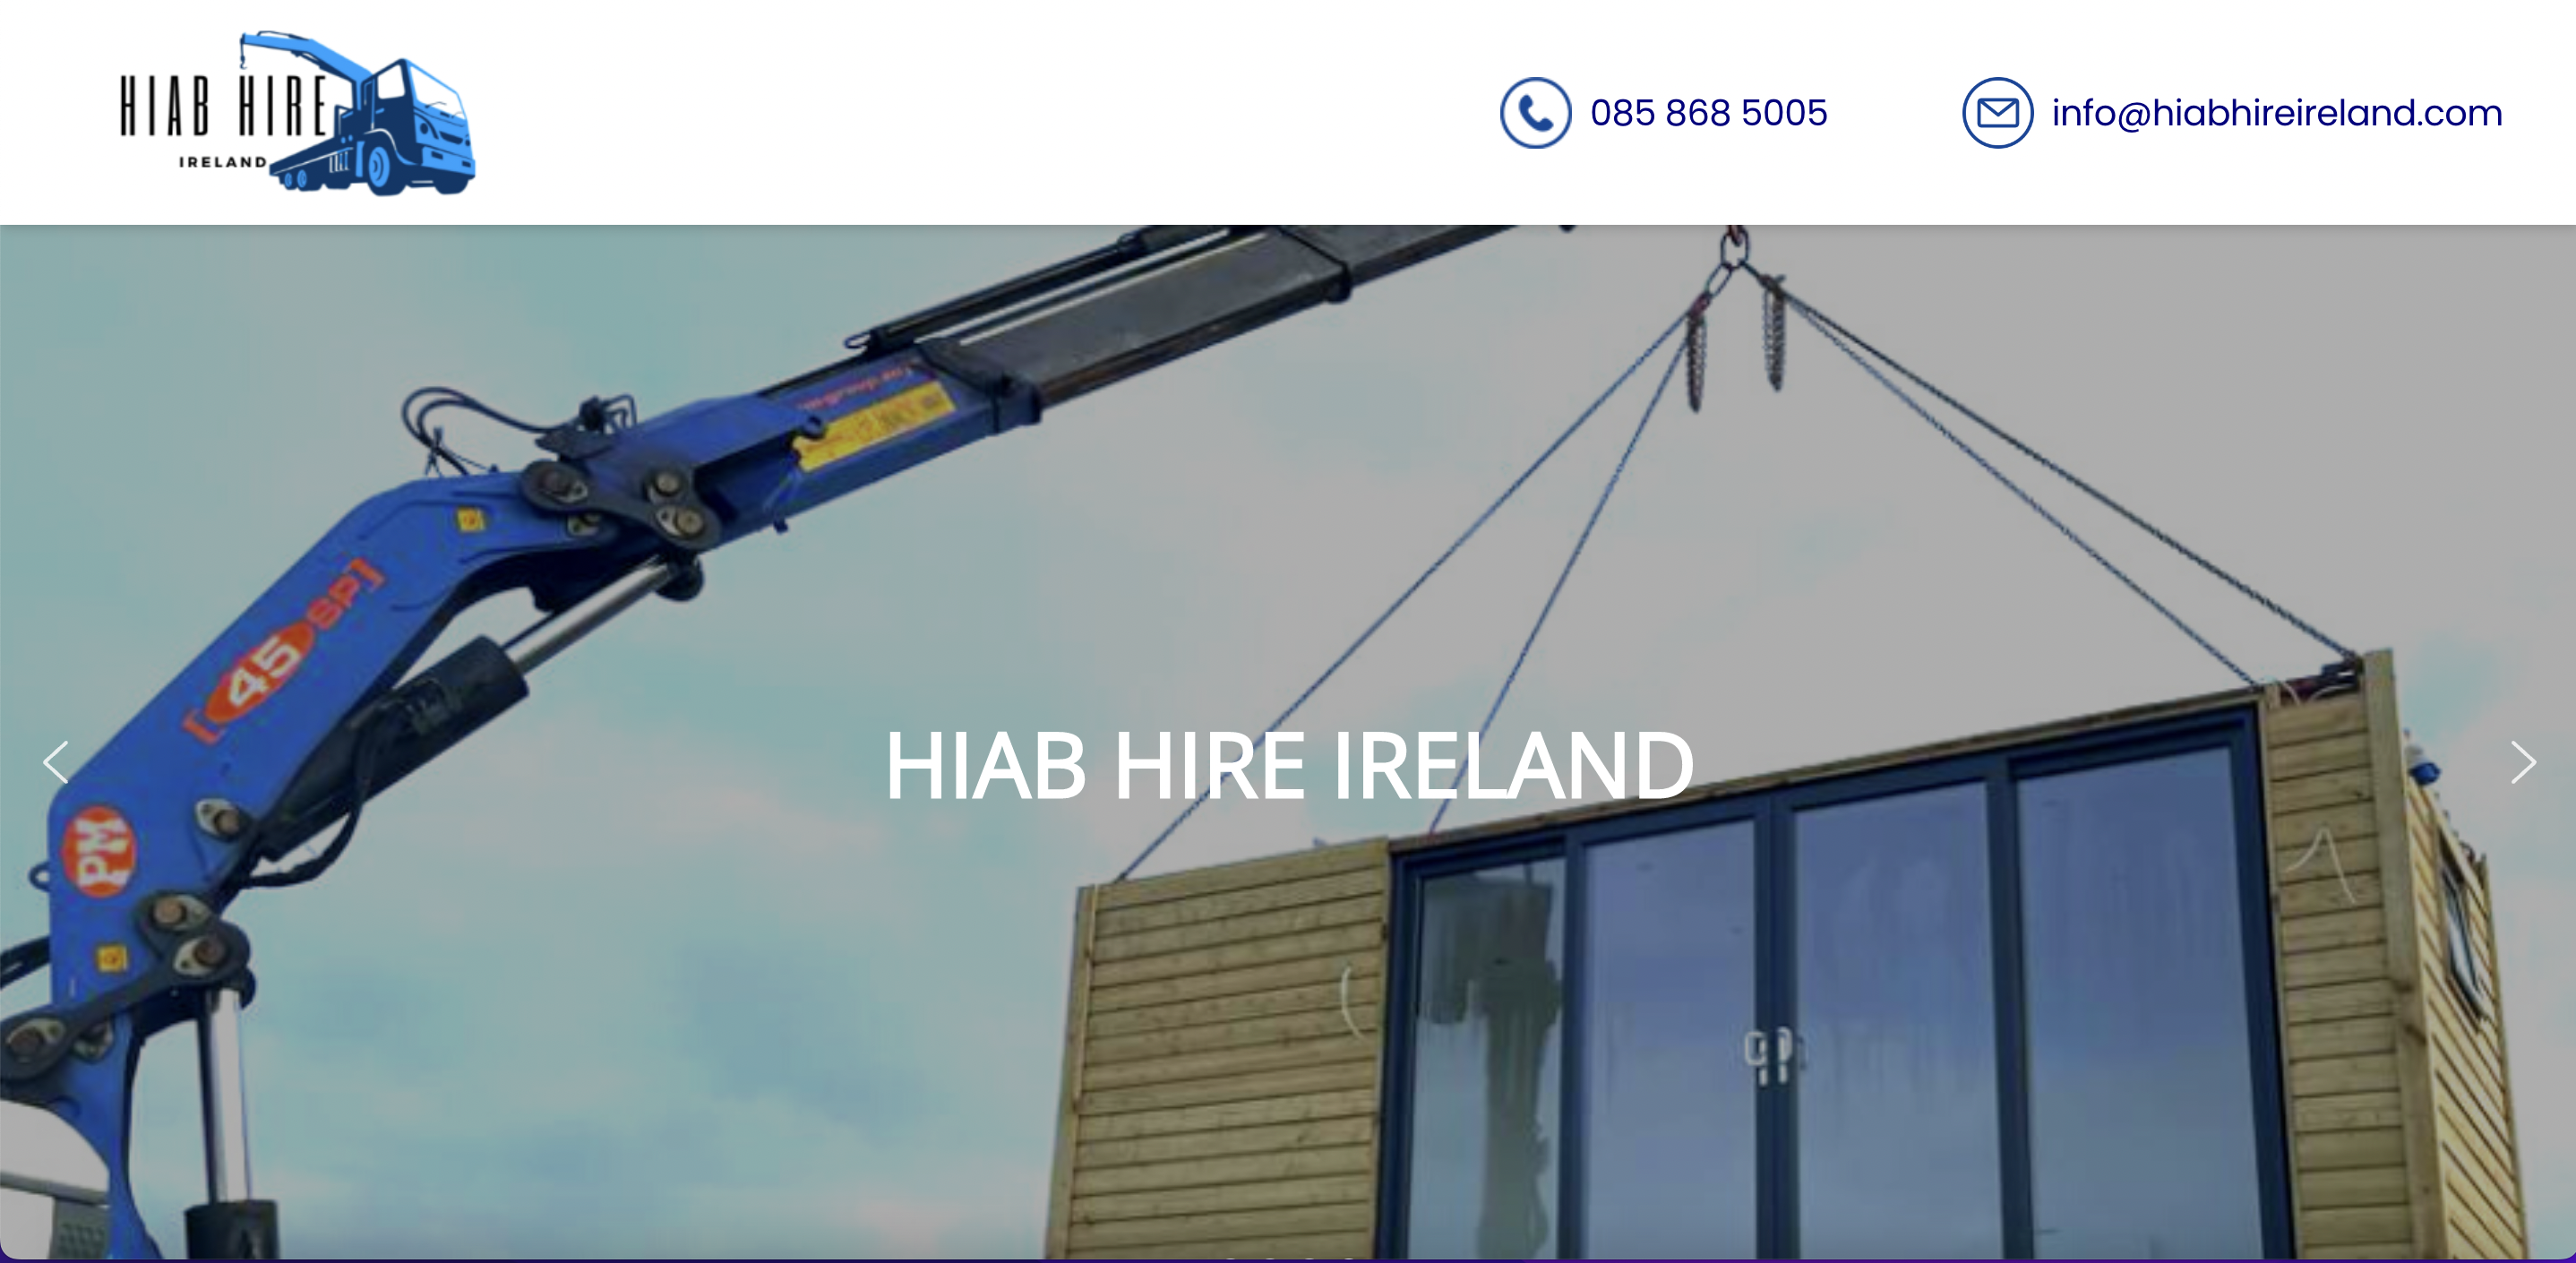 Hiab Hire Landing Page Designed and Developed by DMC Consultancy